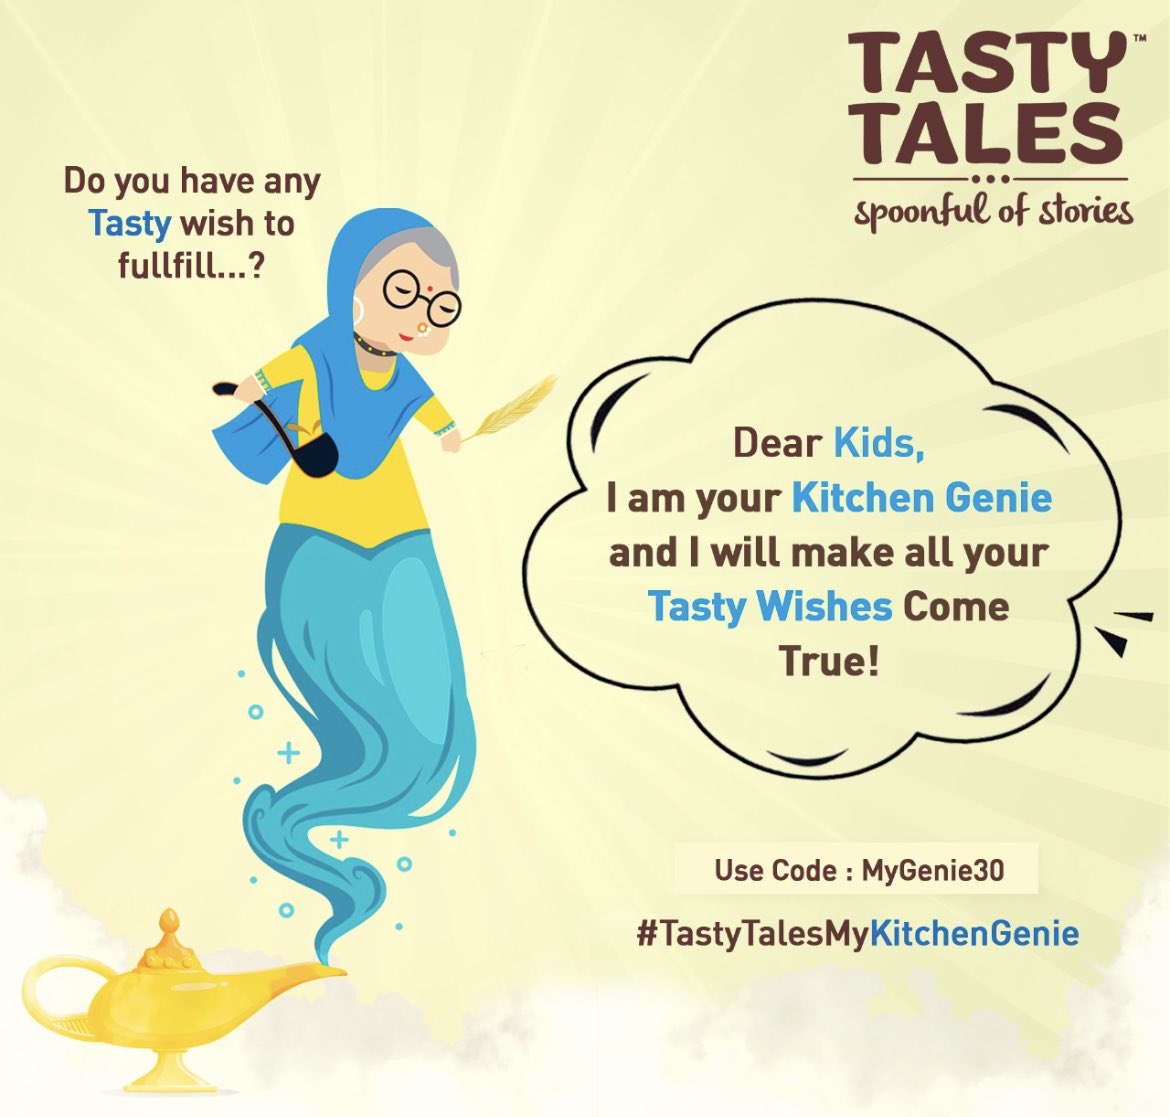 Tell your Kitchen Genie your tastiest wish… Welcome your very own Kitchen Genie who grants your yummy wishes in no time! #KitchenGenie #TastyTales #Spoonfulofstories #readytocook #readyin20mintues #DishesallaroundIndia #deliciousCurryPastes #Ordernow